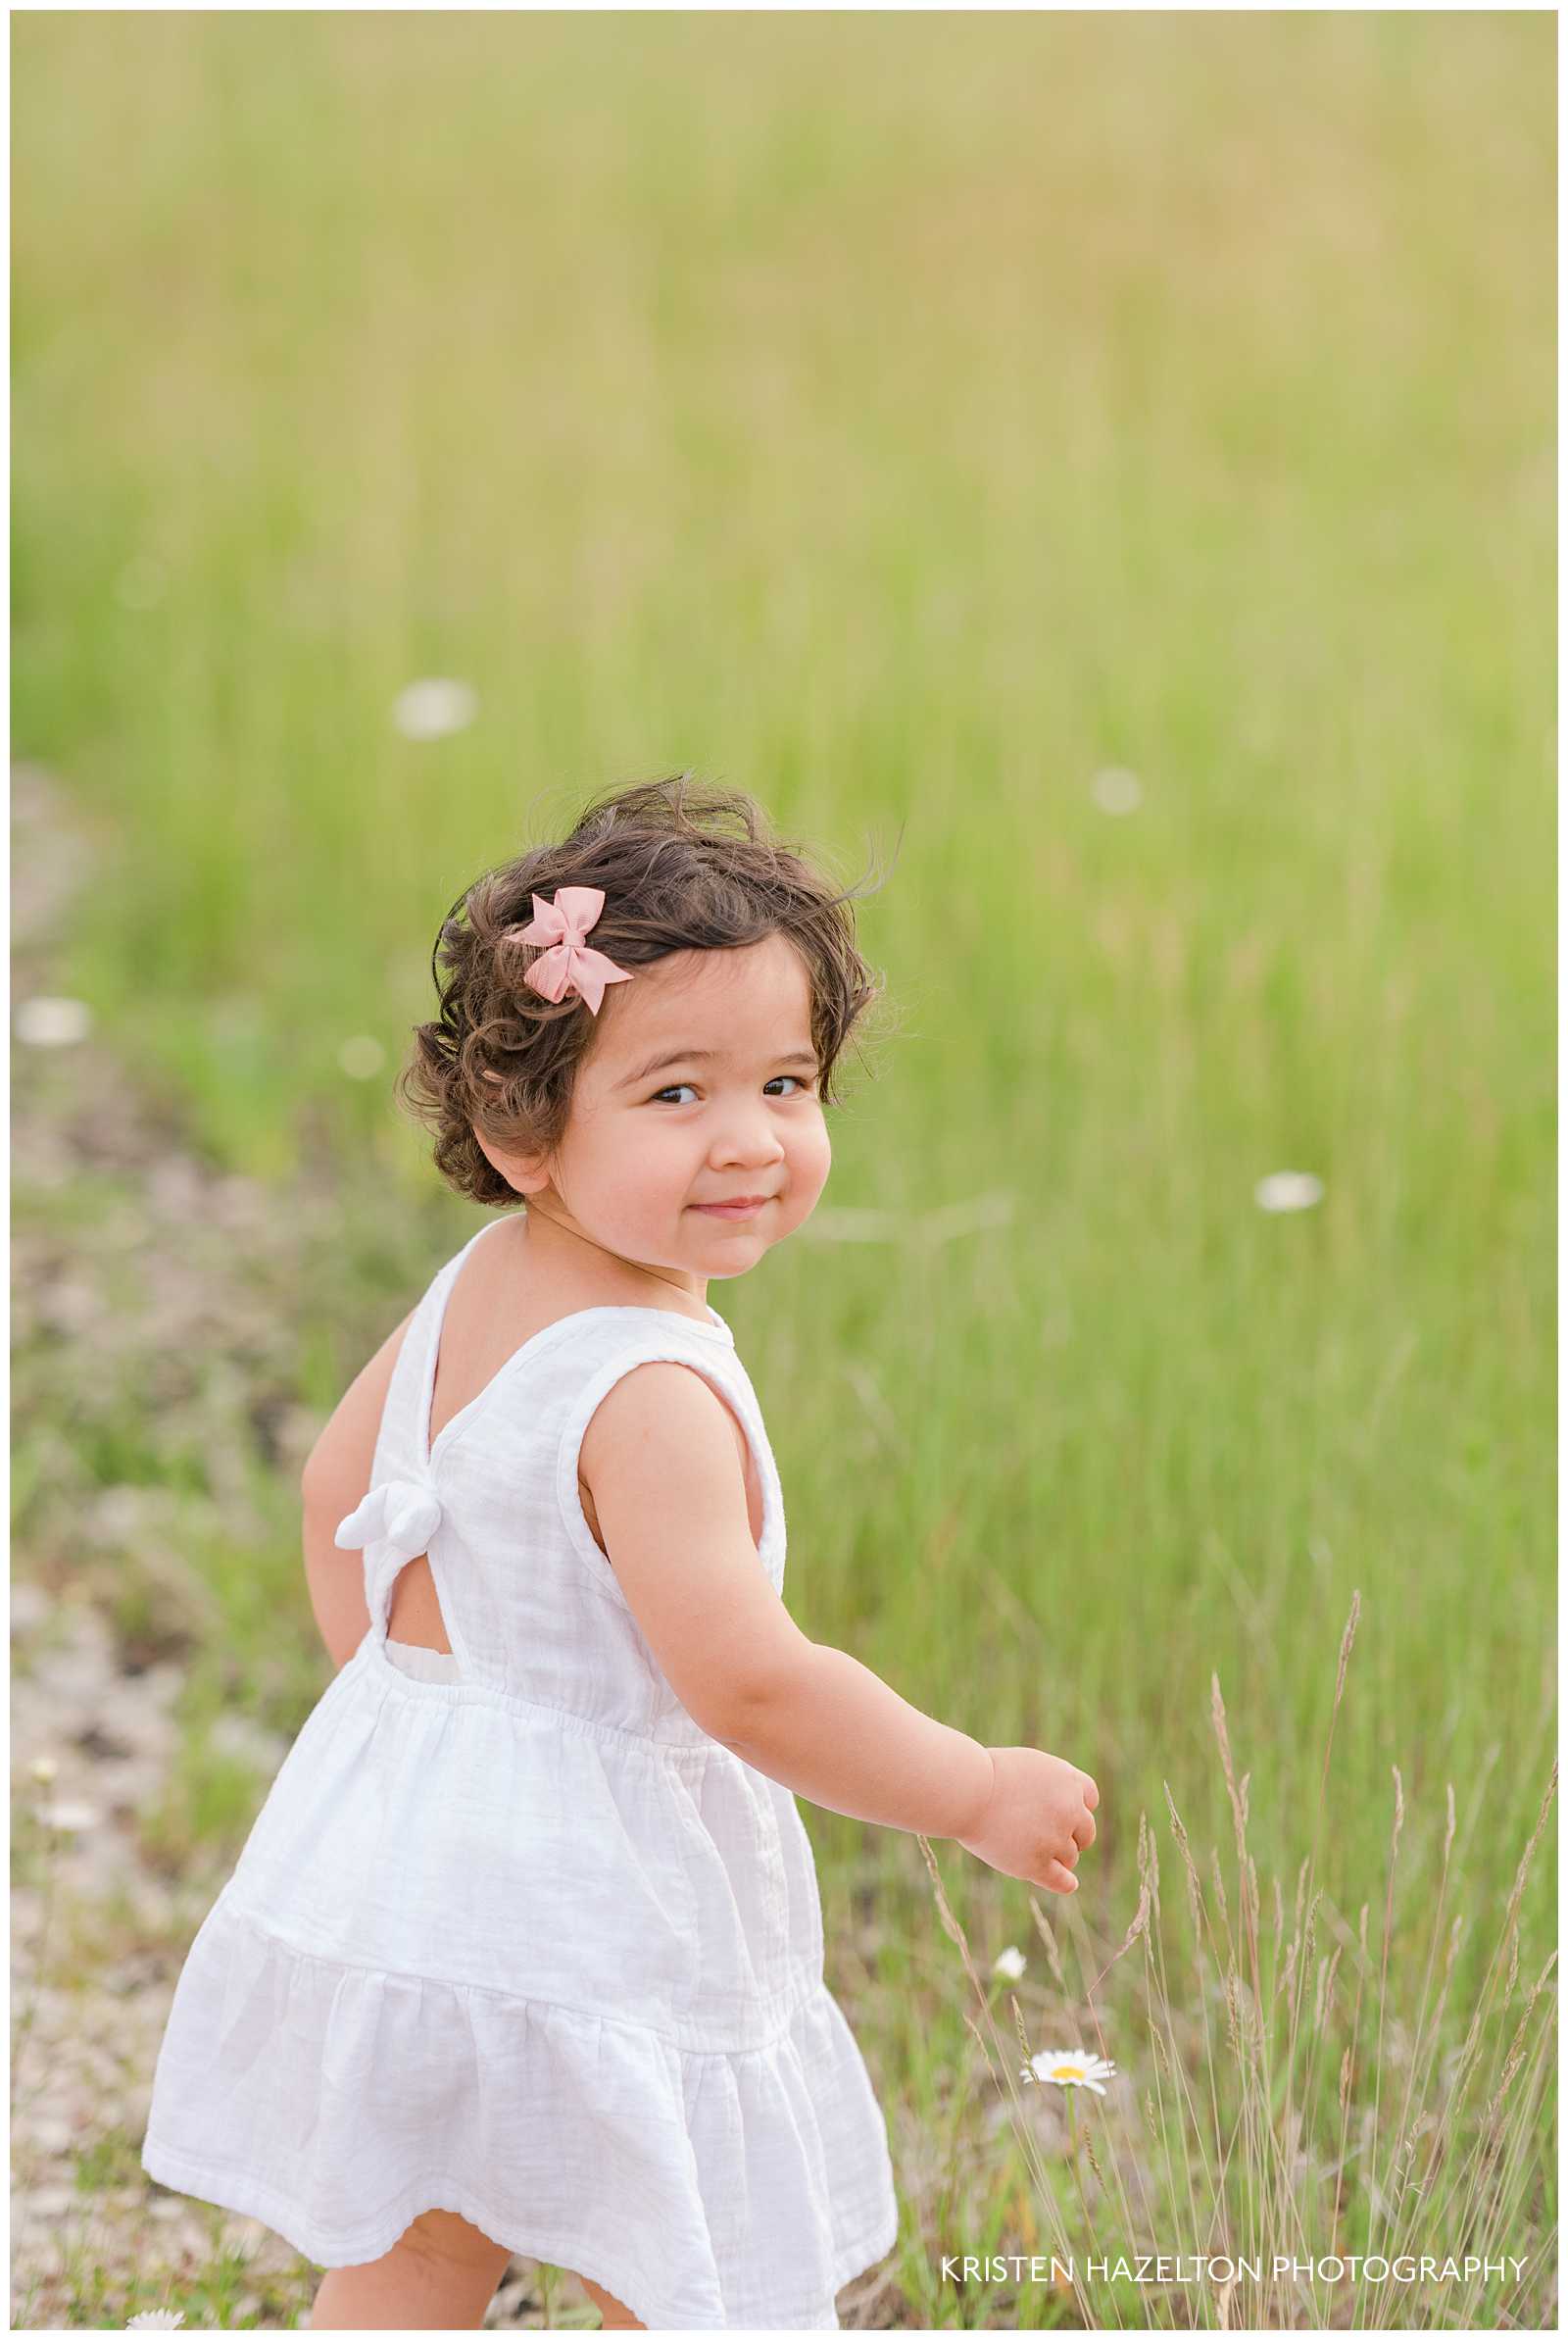 Little girl playing in a meadow by Forest Park, IL photographer Kristen Hazelton